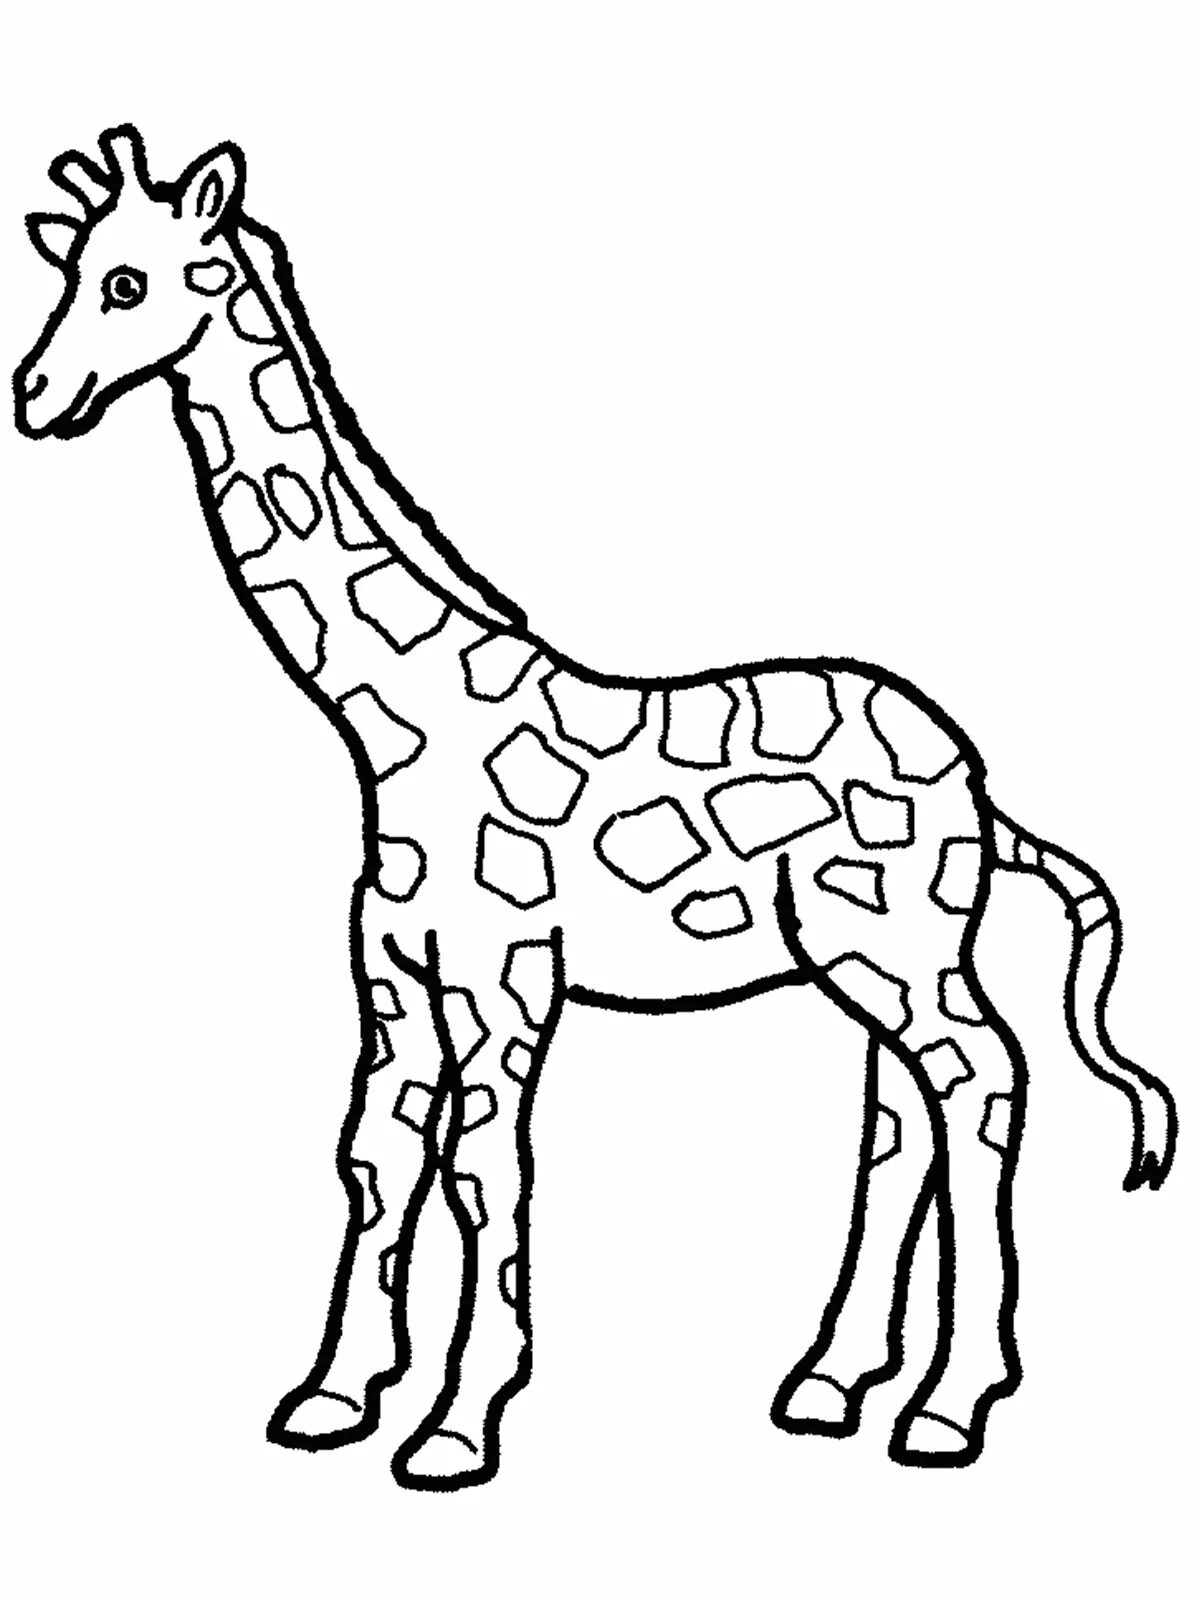 Adorable giraffe coloring page for 6-7 year olds